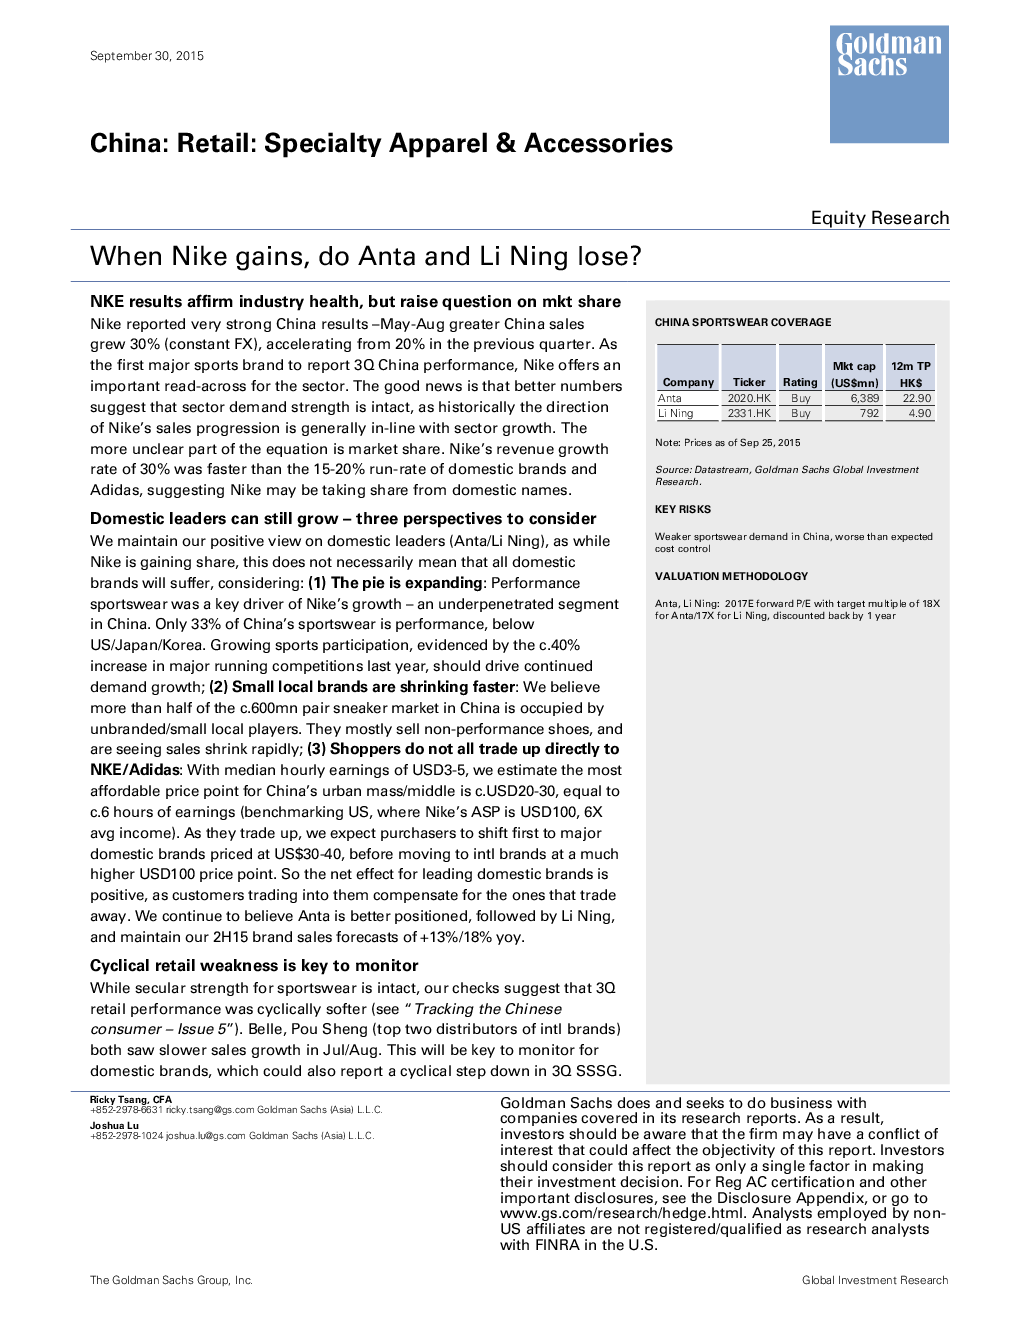 nike equity research report